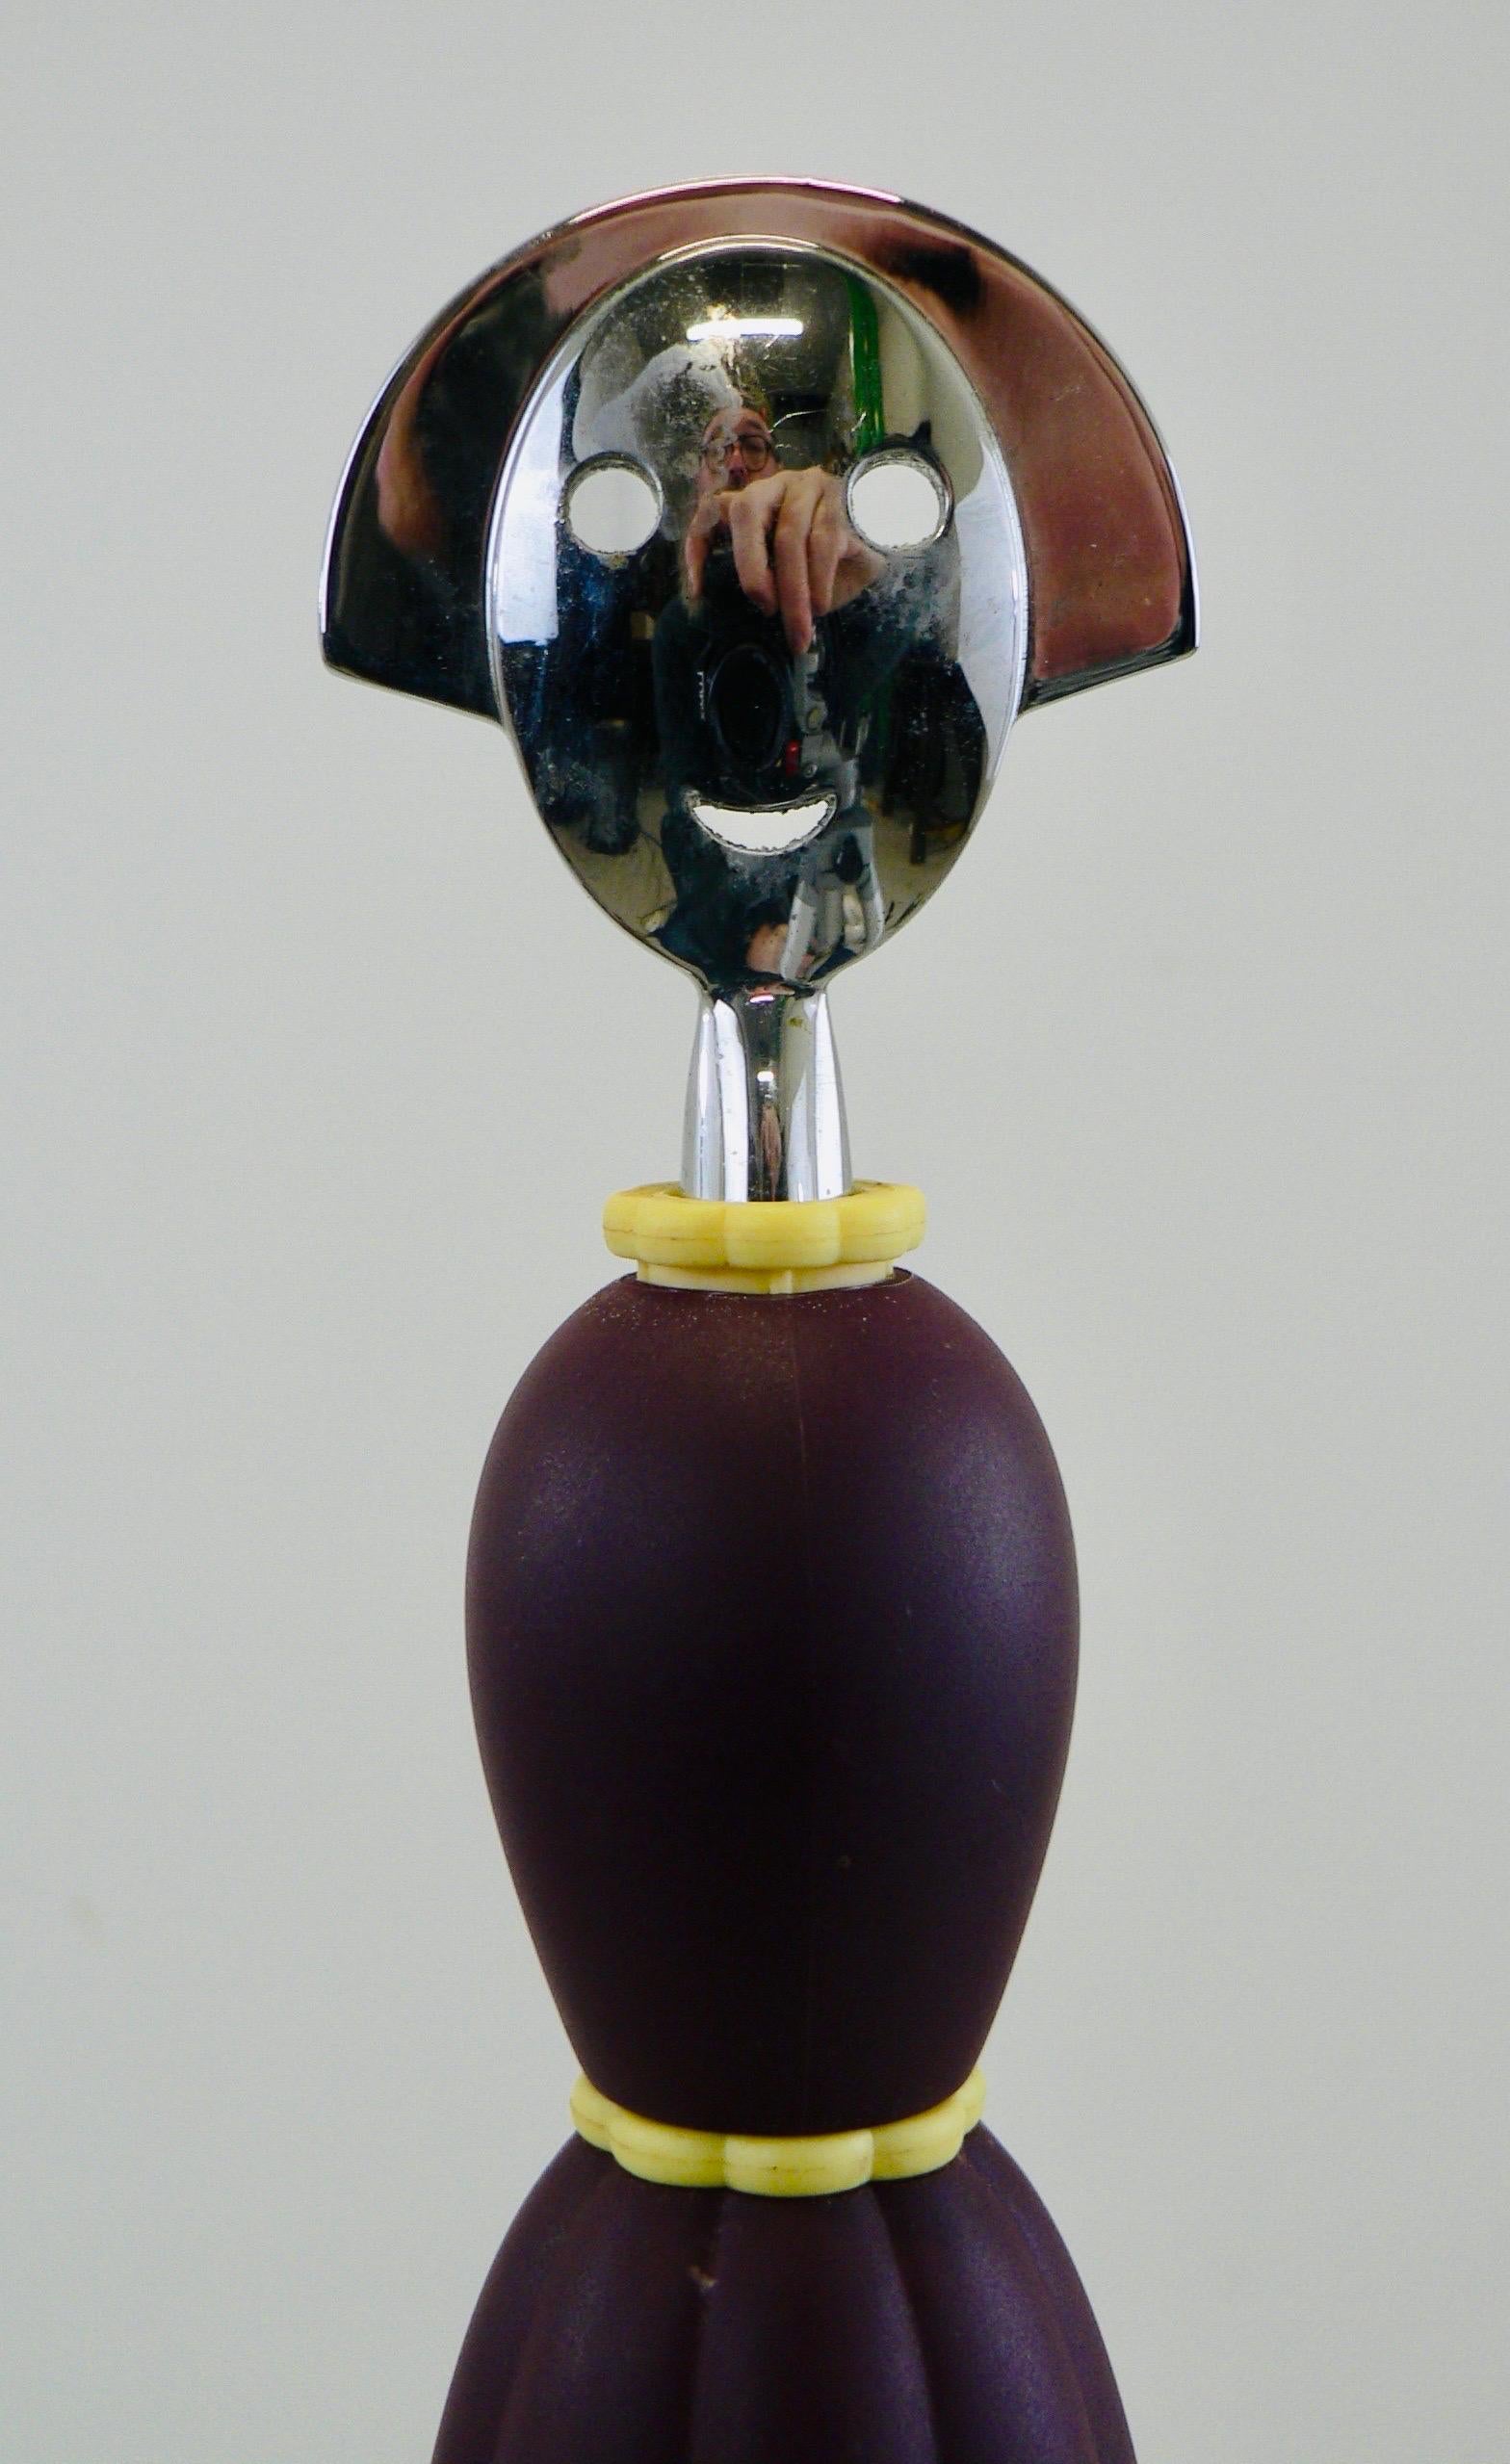 Italian Pepper mill created by Alessandro Mendini in 1998 for Alessi. For Sale